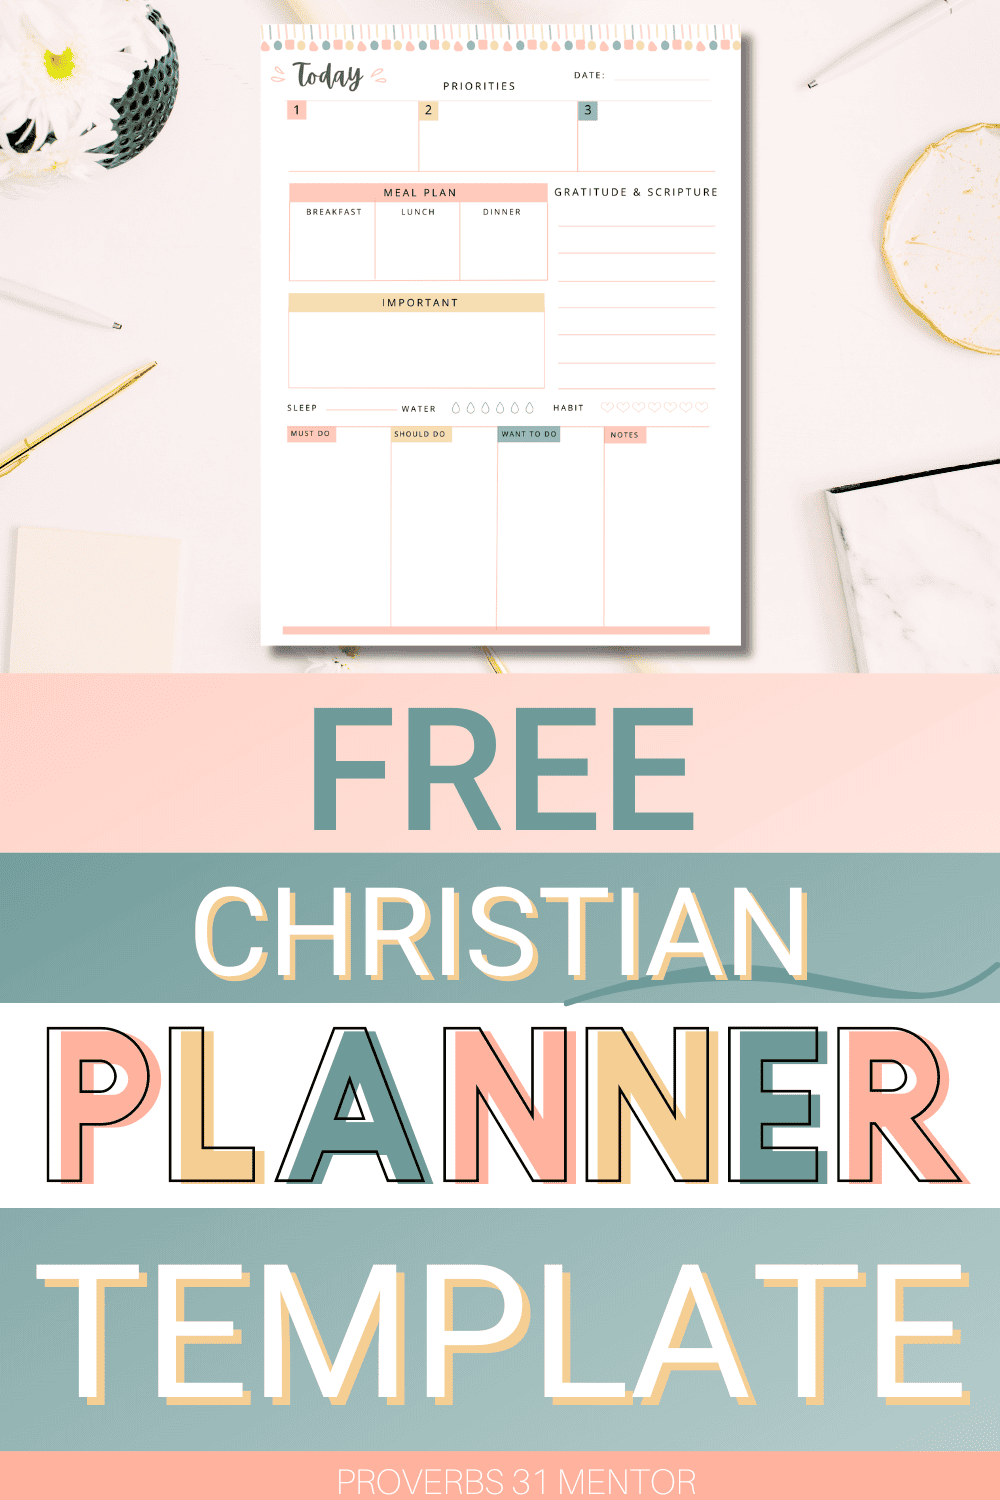 Free Christian planner template and daily schedule template